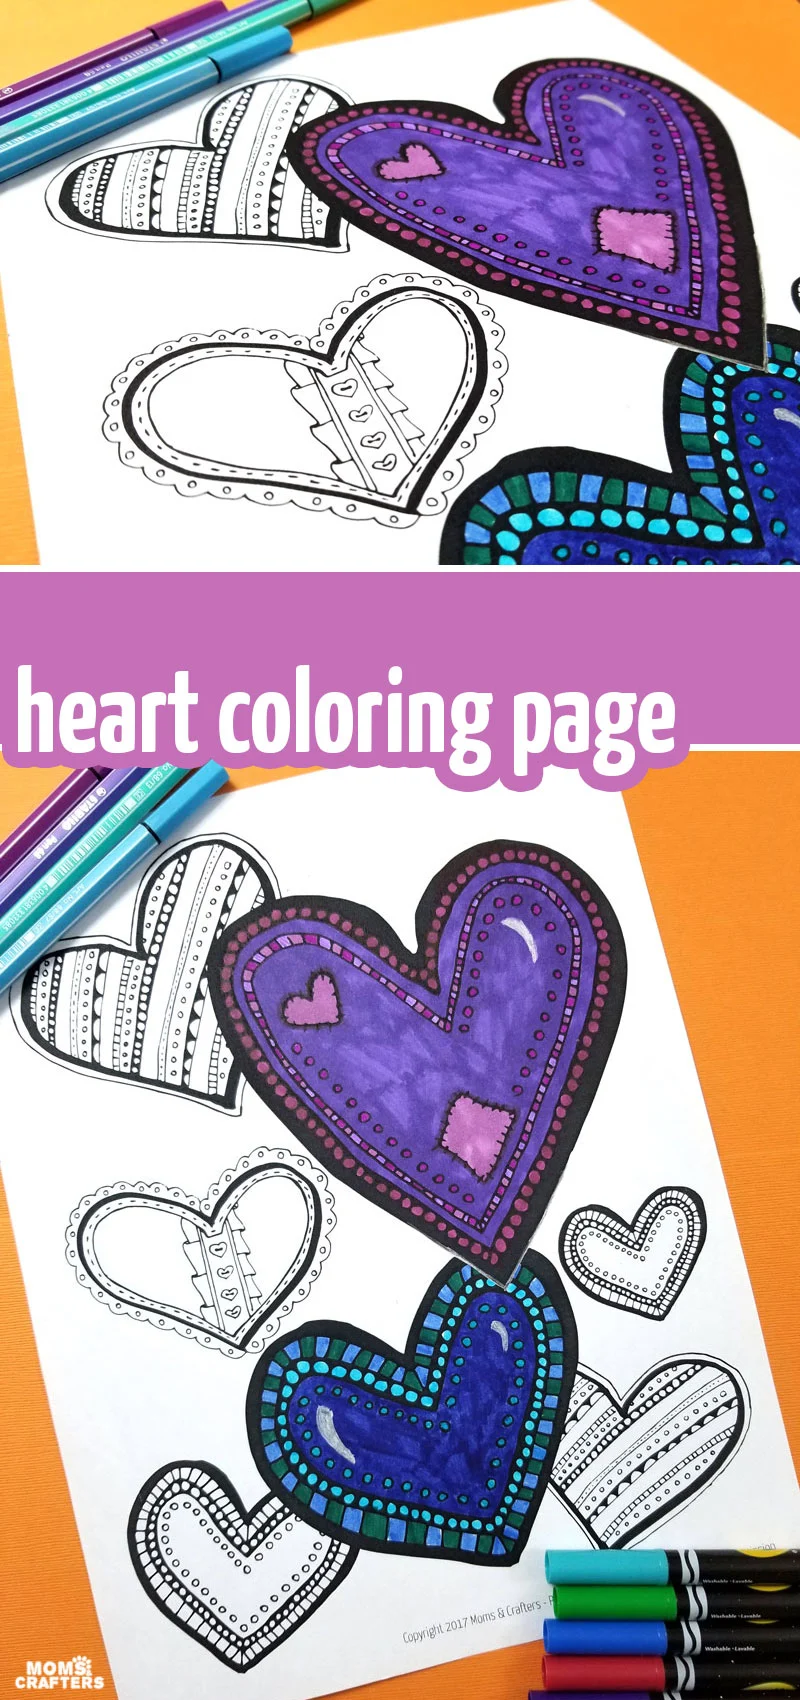 Click to download your free printable heart coloring page for teens or adults! This fun free printable adult colouring page is perfect for valentine's day 